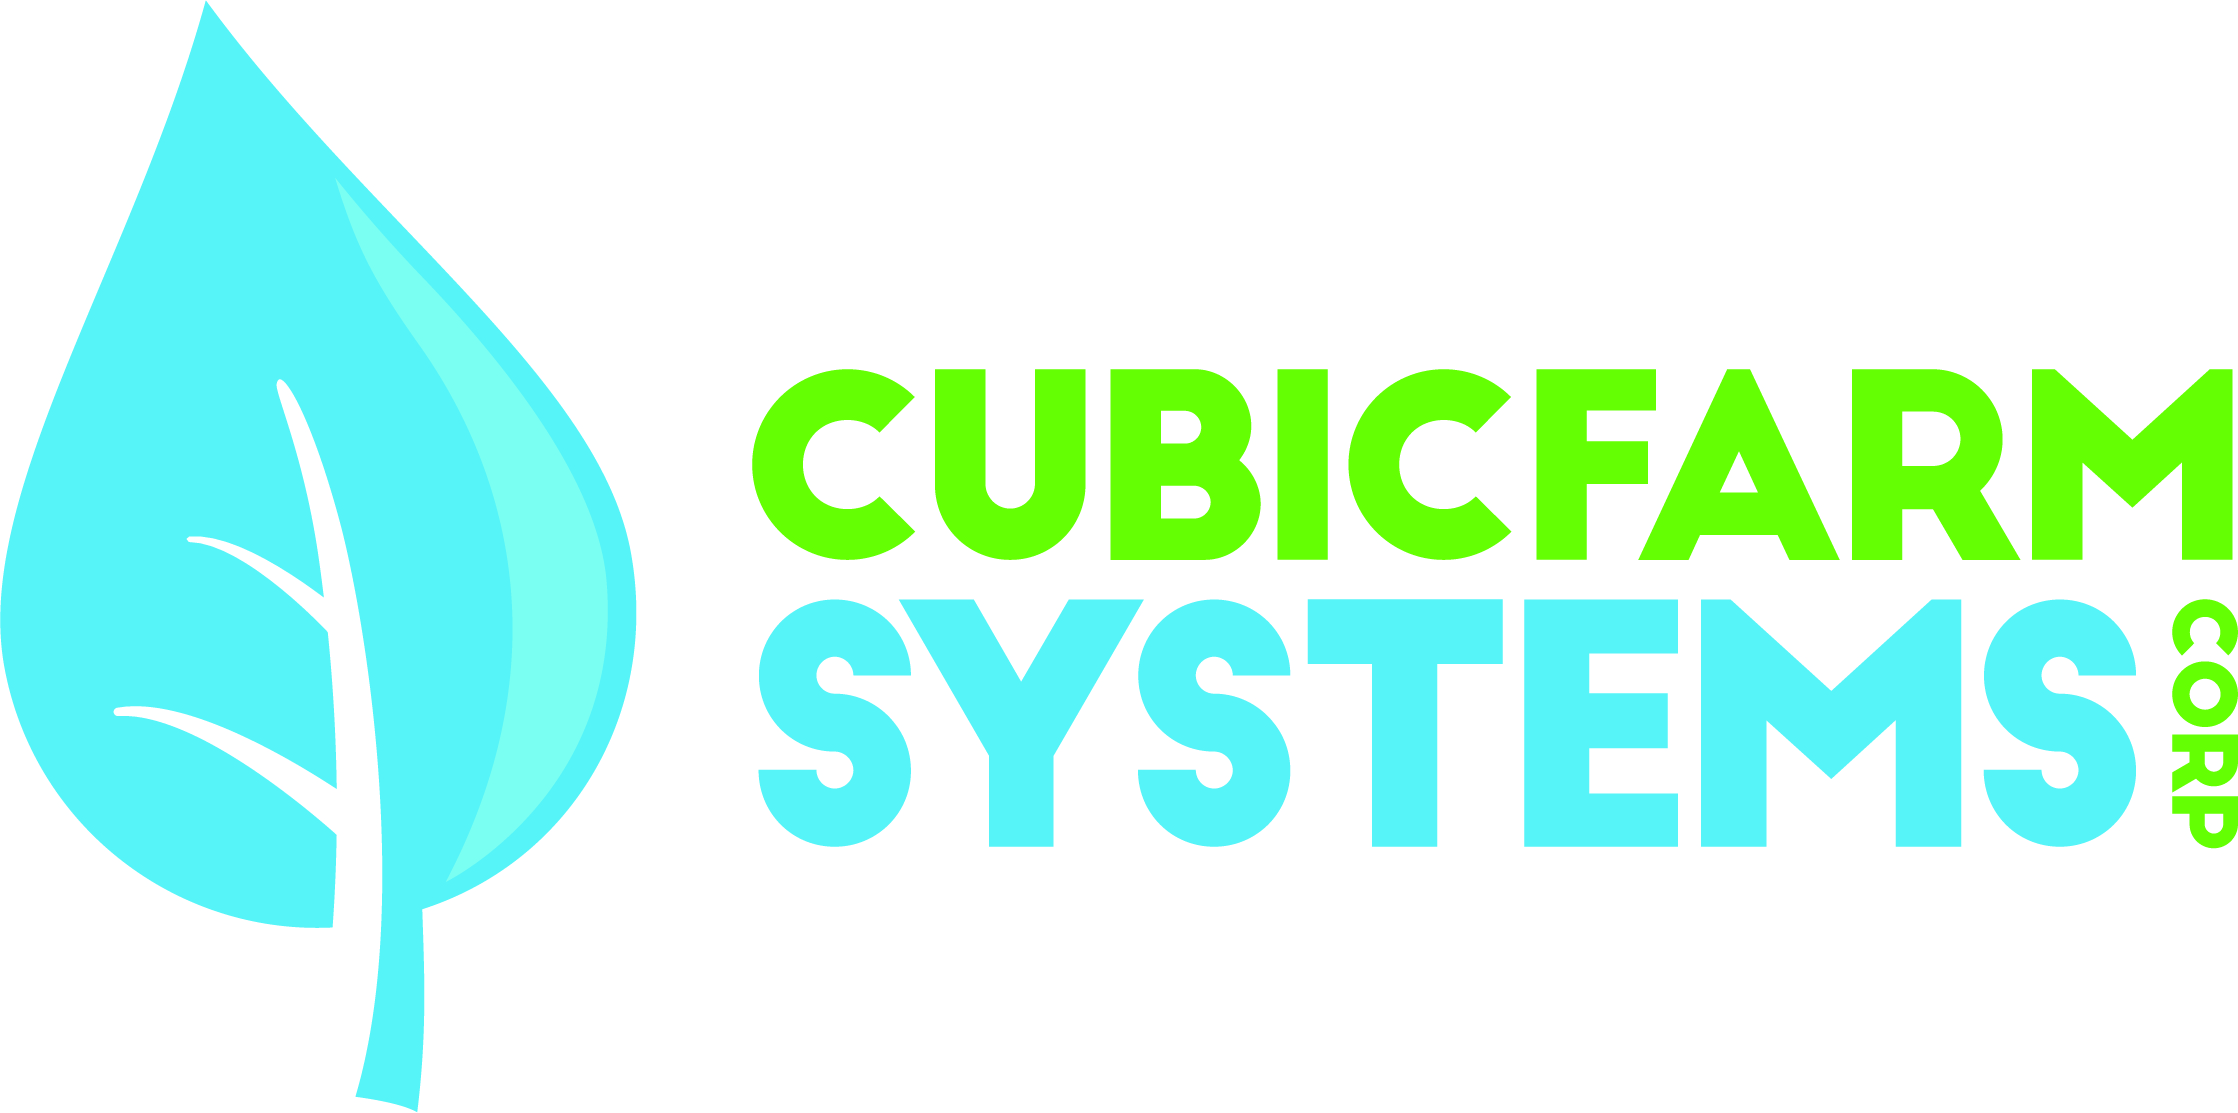 CubicFarm Systems Corp, Tuesday, October 8, 2019, Press release picture